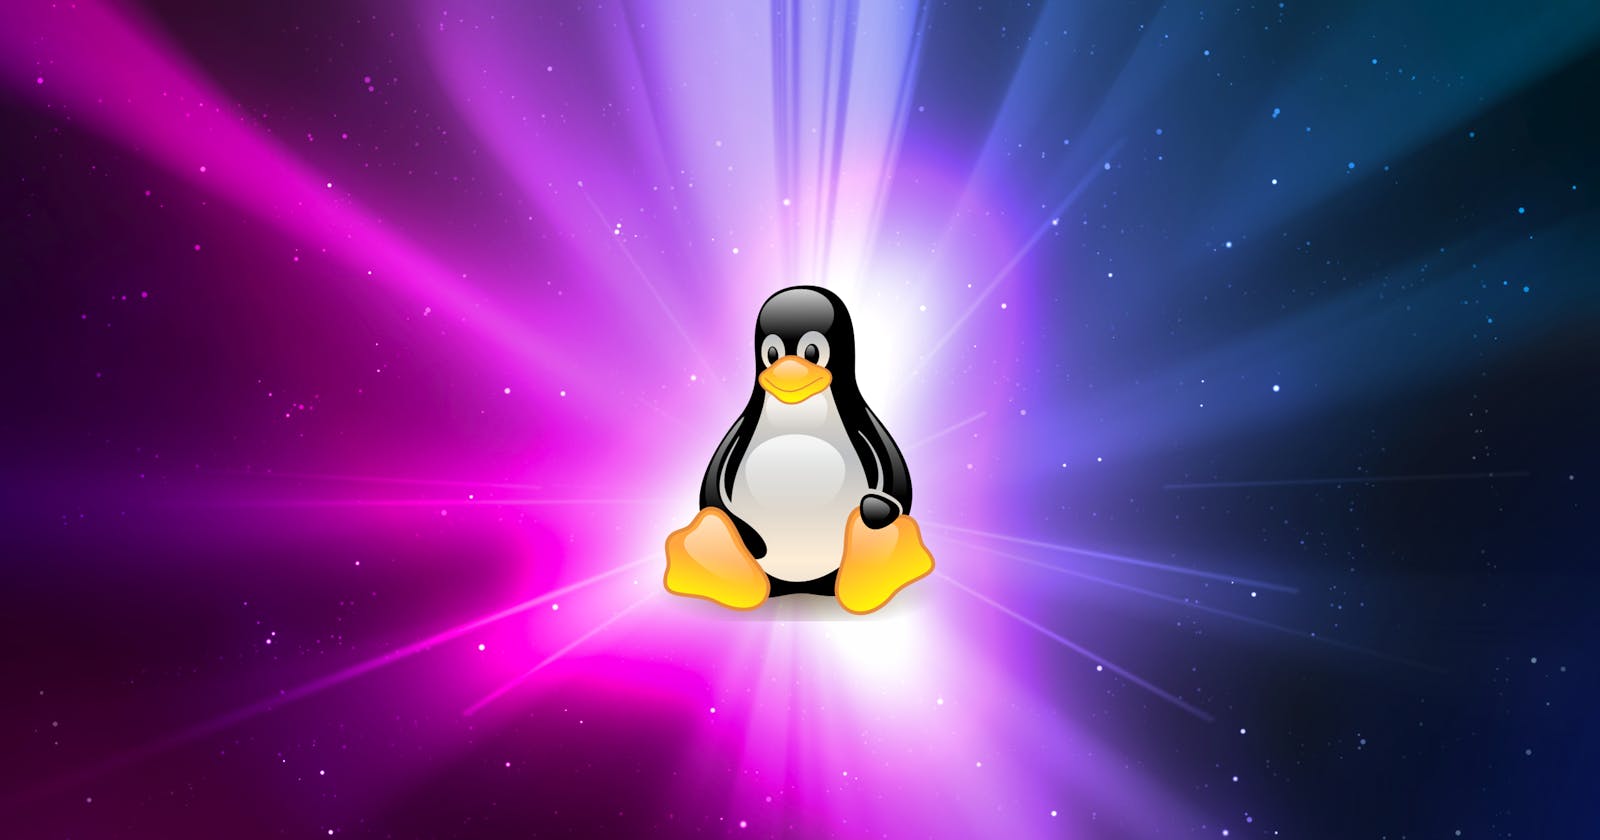 Linux Commands Every Developer Should Know